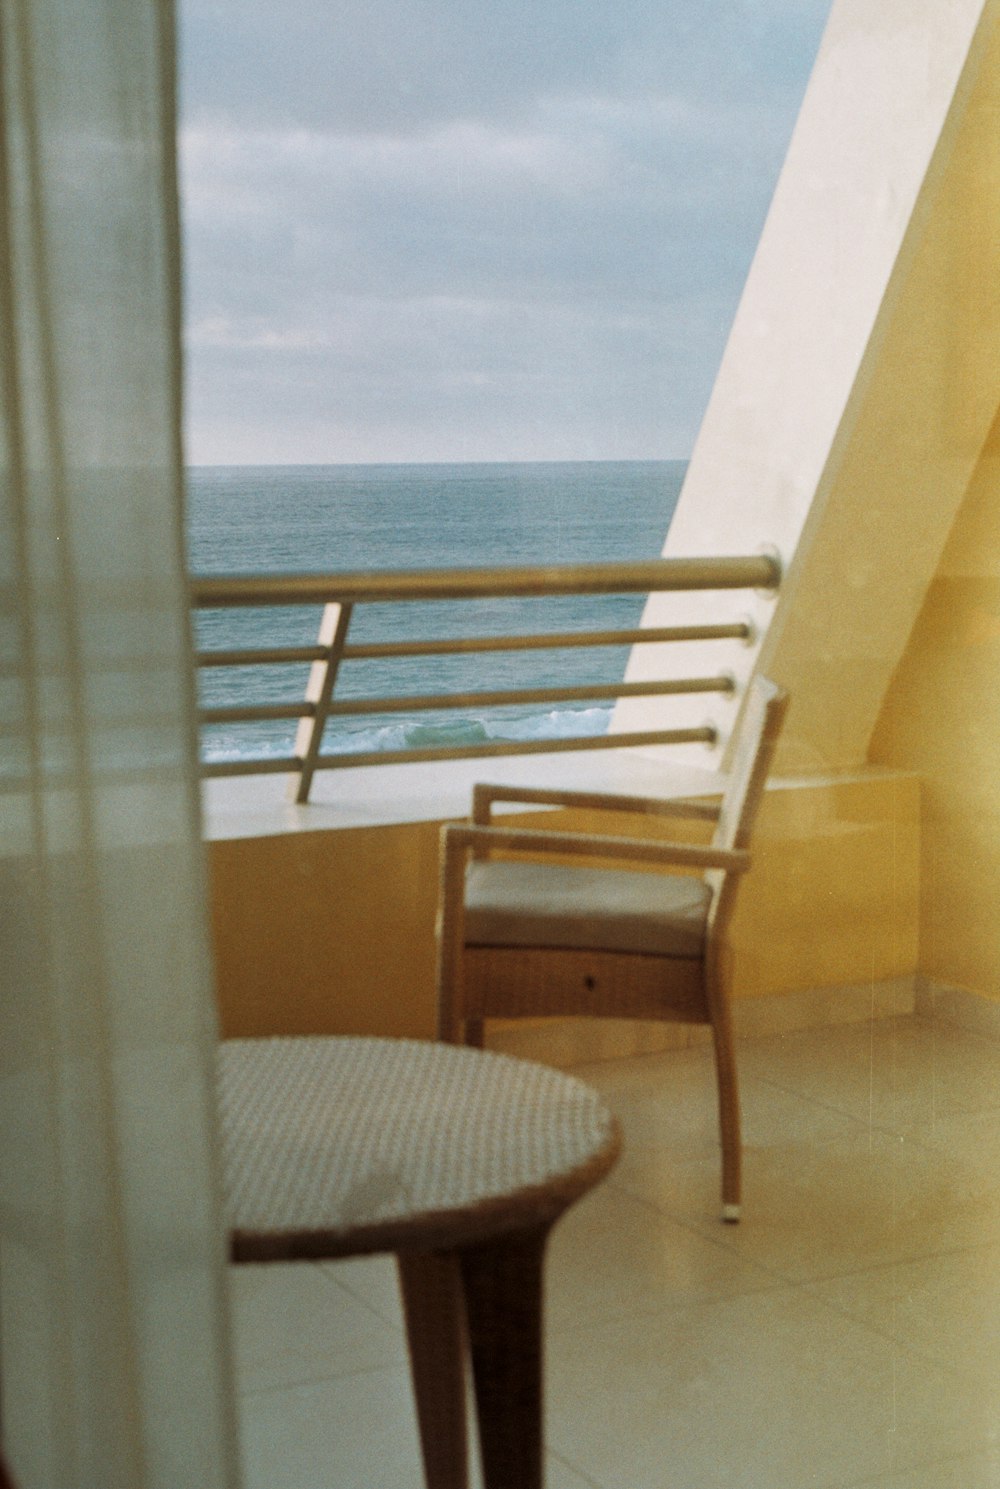 a chair and table on a balcony overlooking the ocean